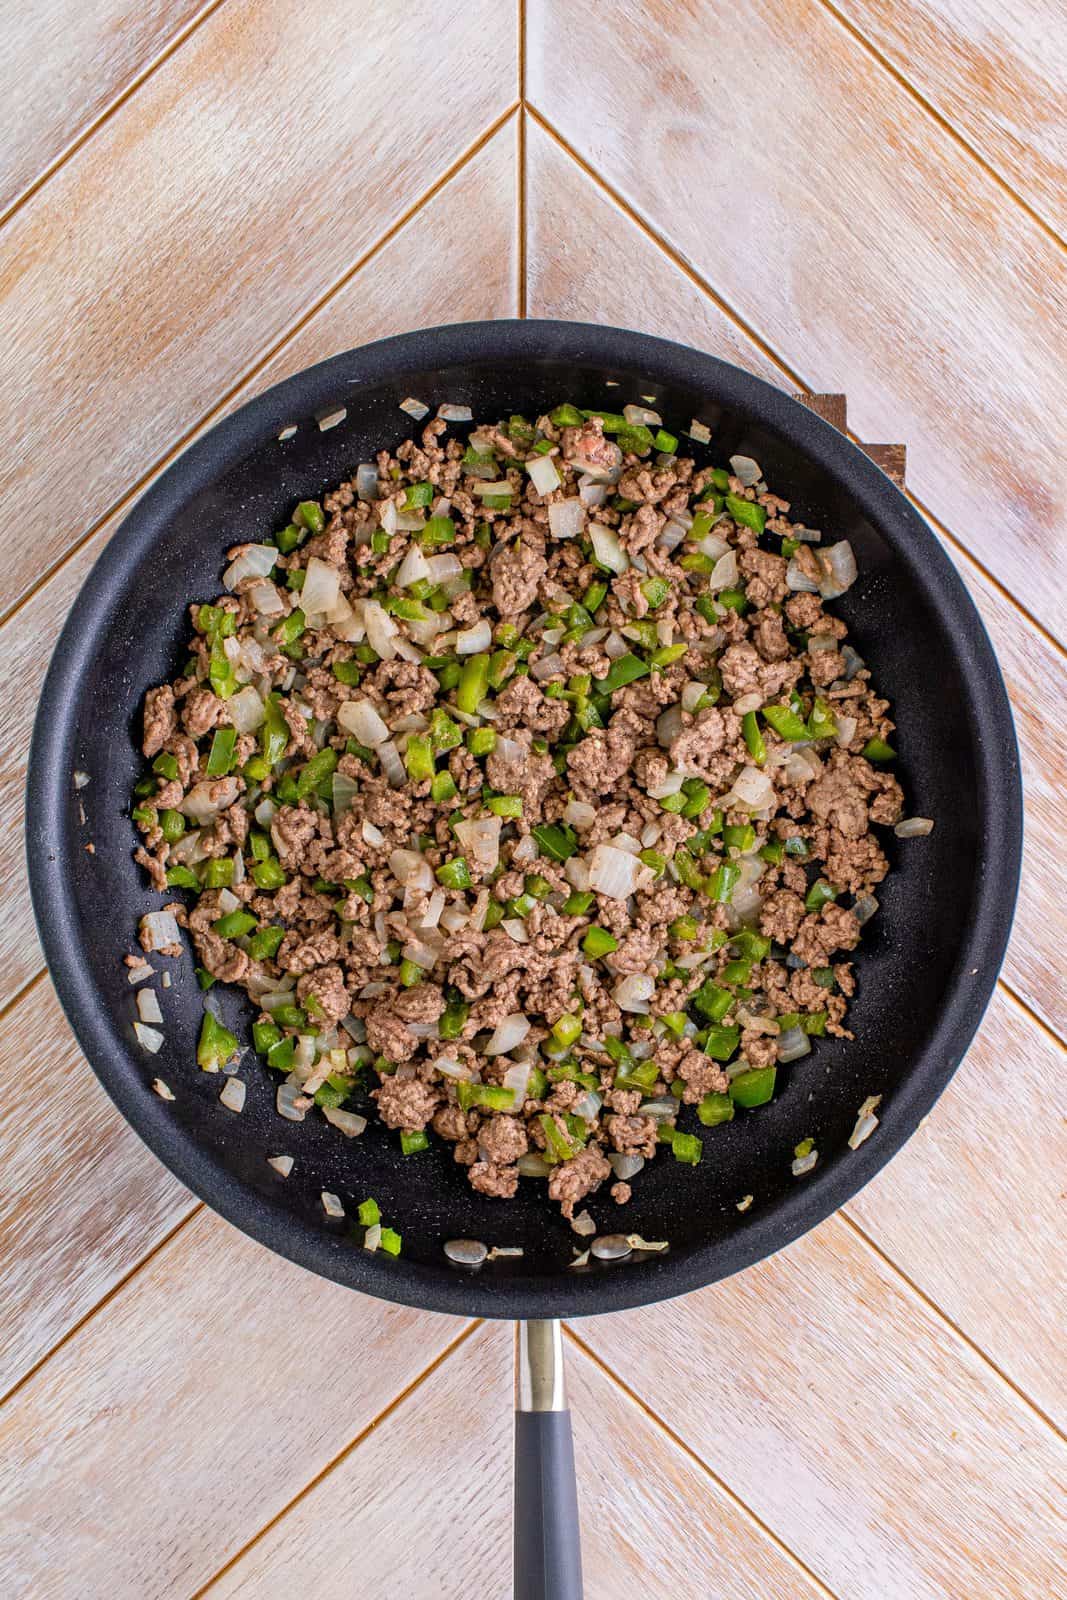 Ground beef, onion and green peppers cooked in saute pan.